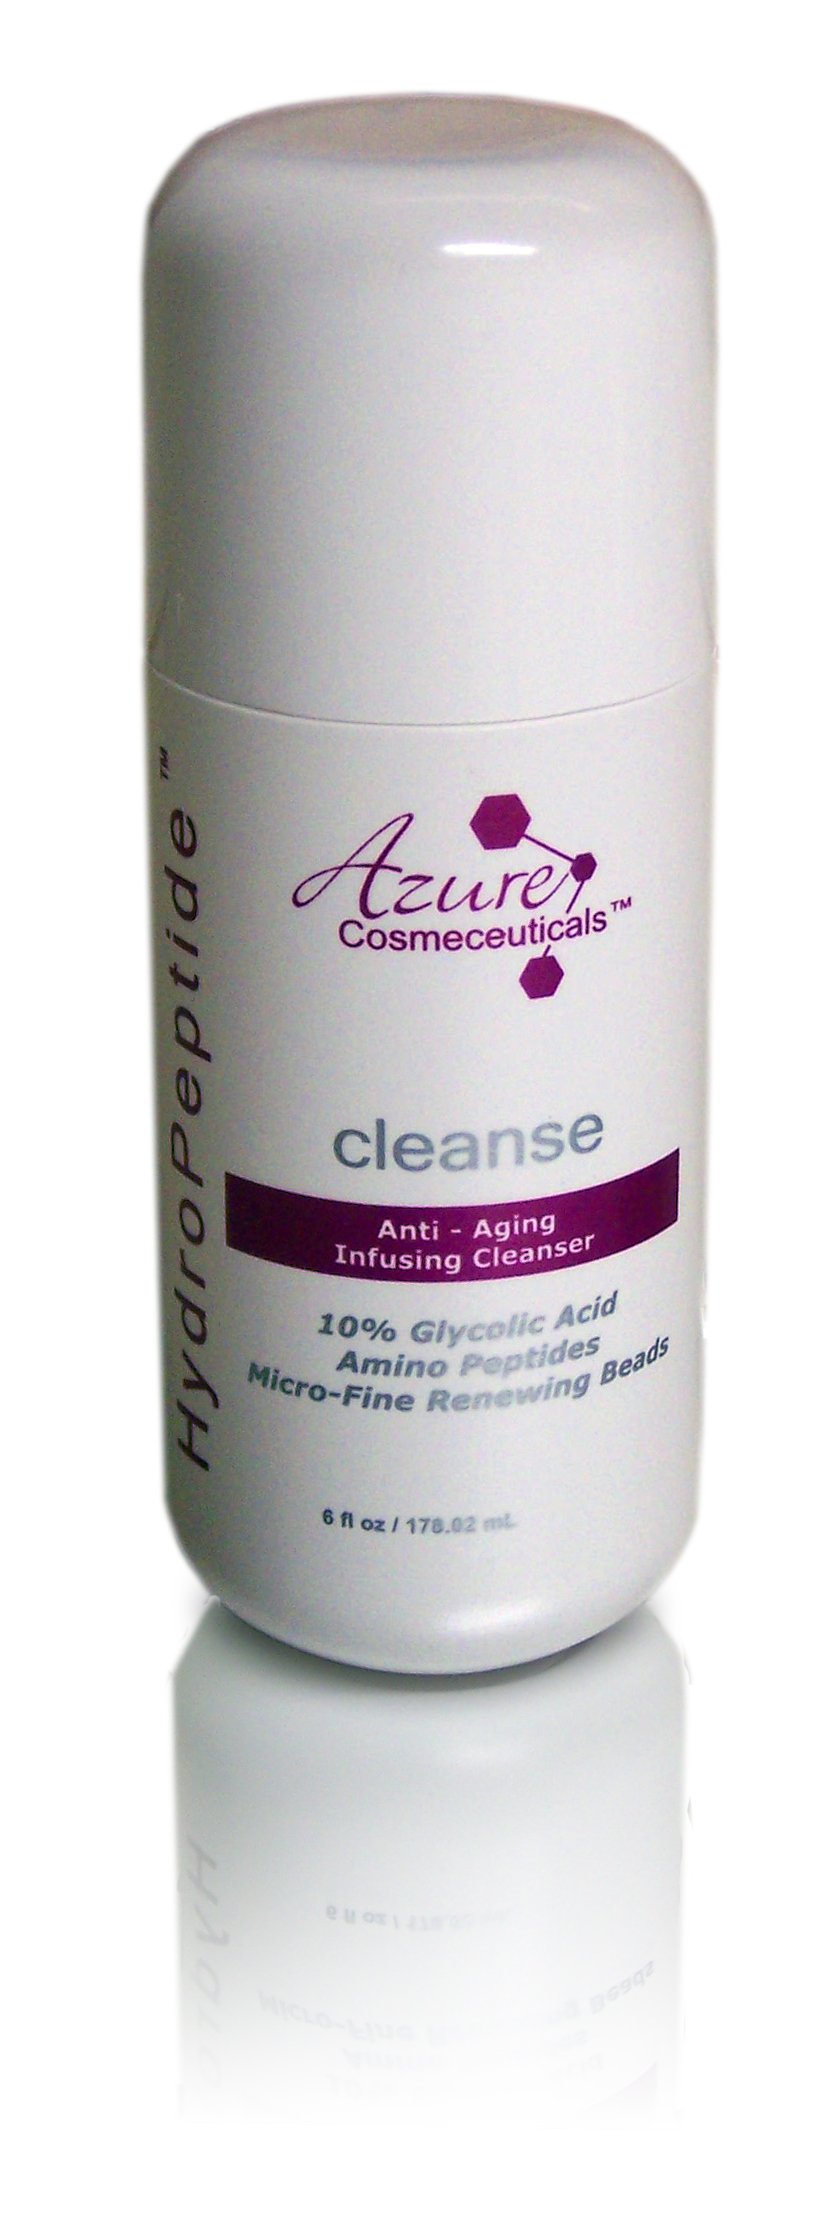 Azure HydroPeptide Anti-Aging Infusing Cleanser